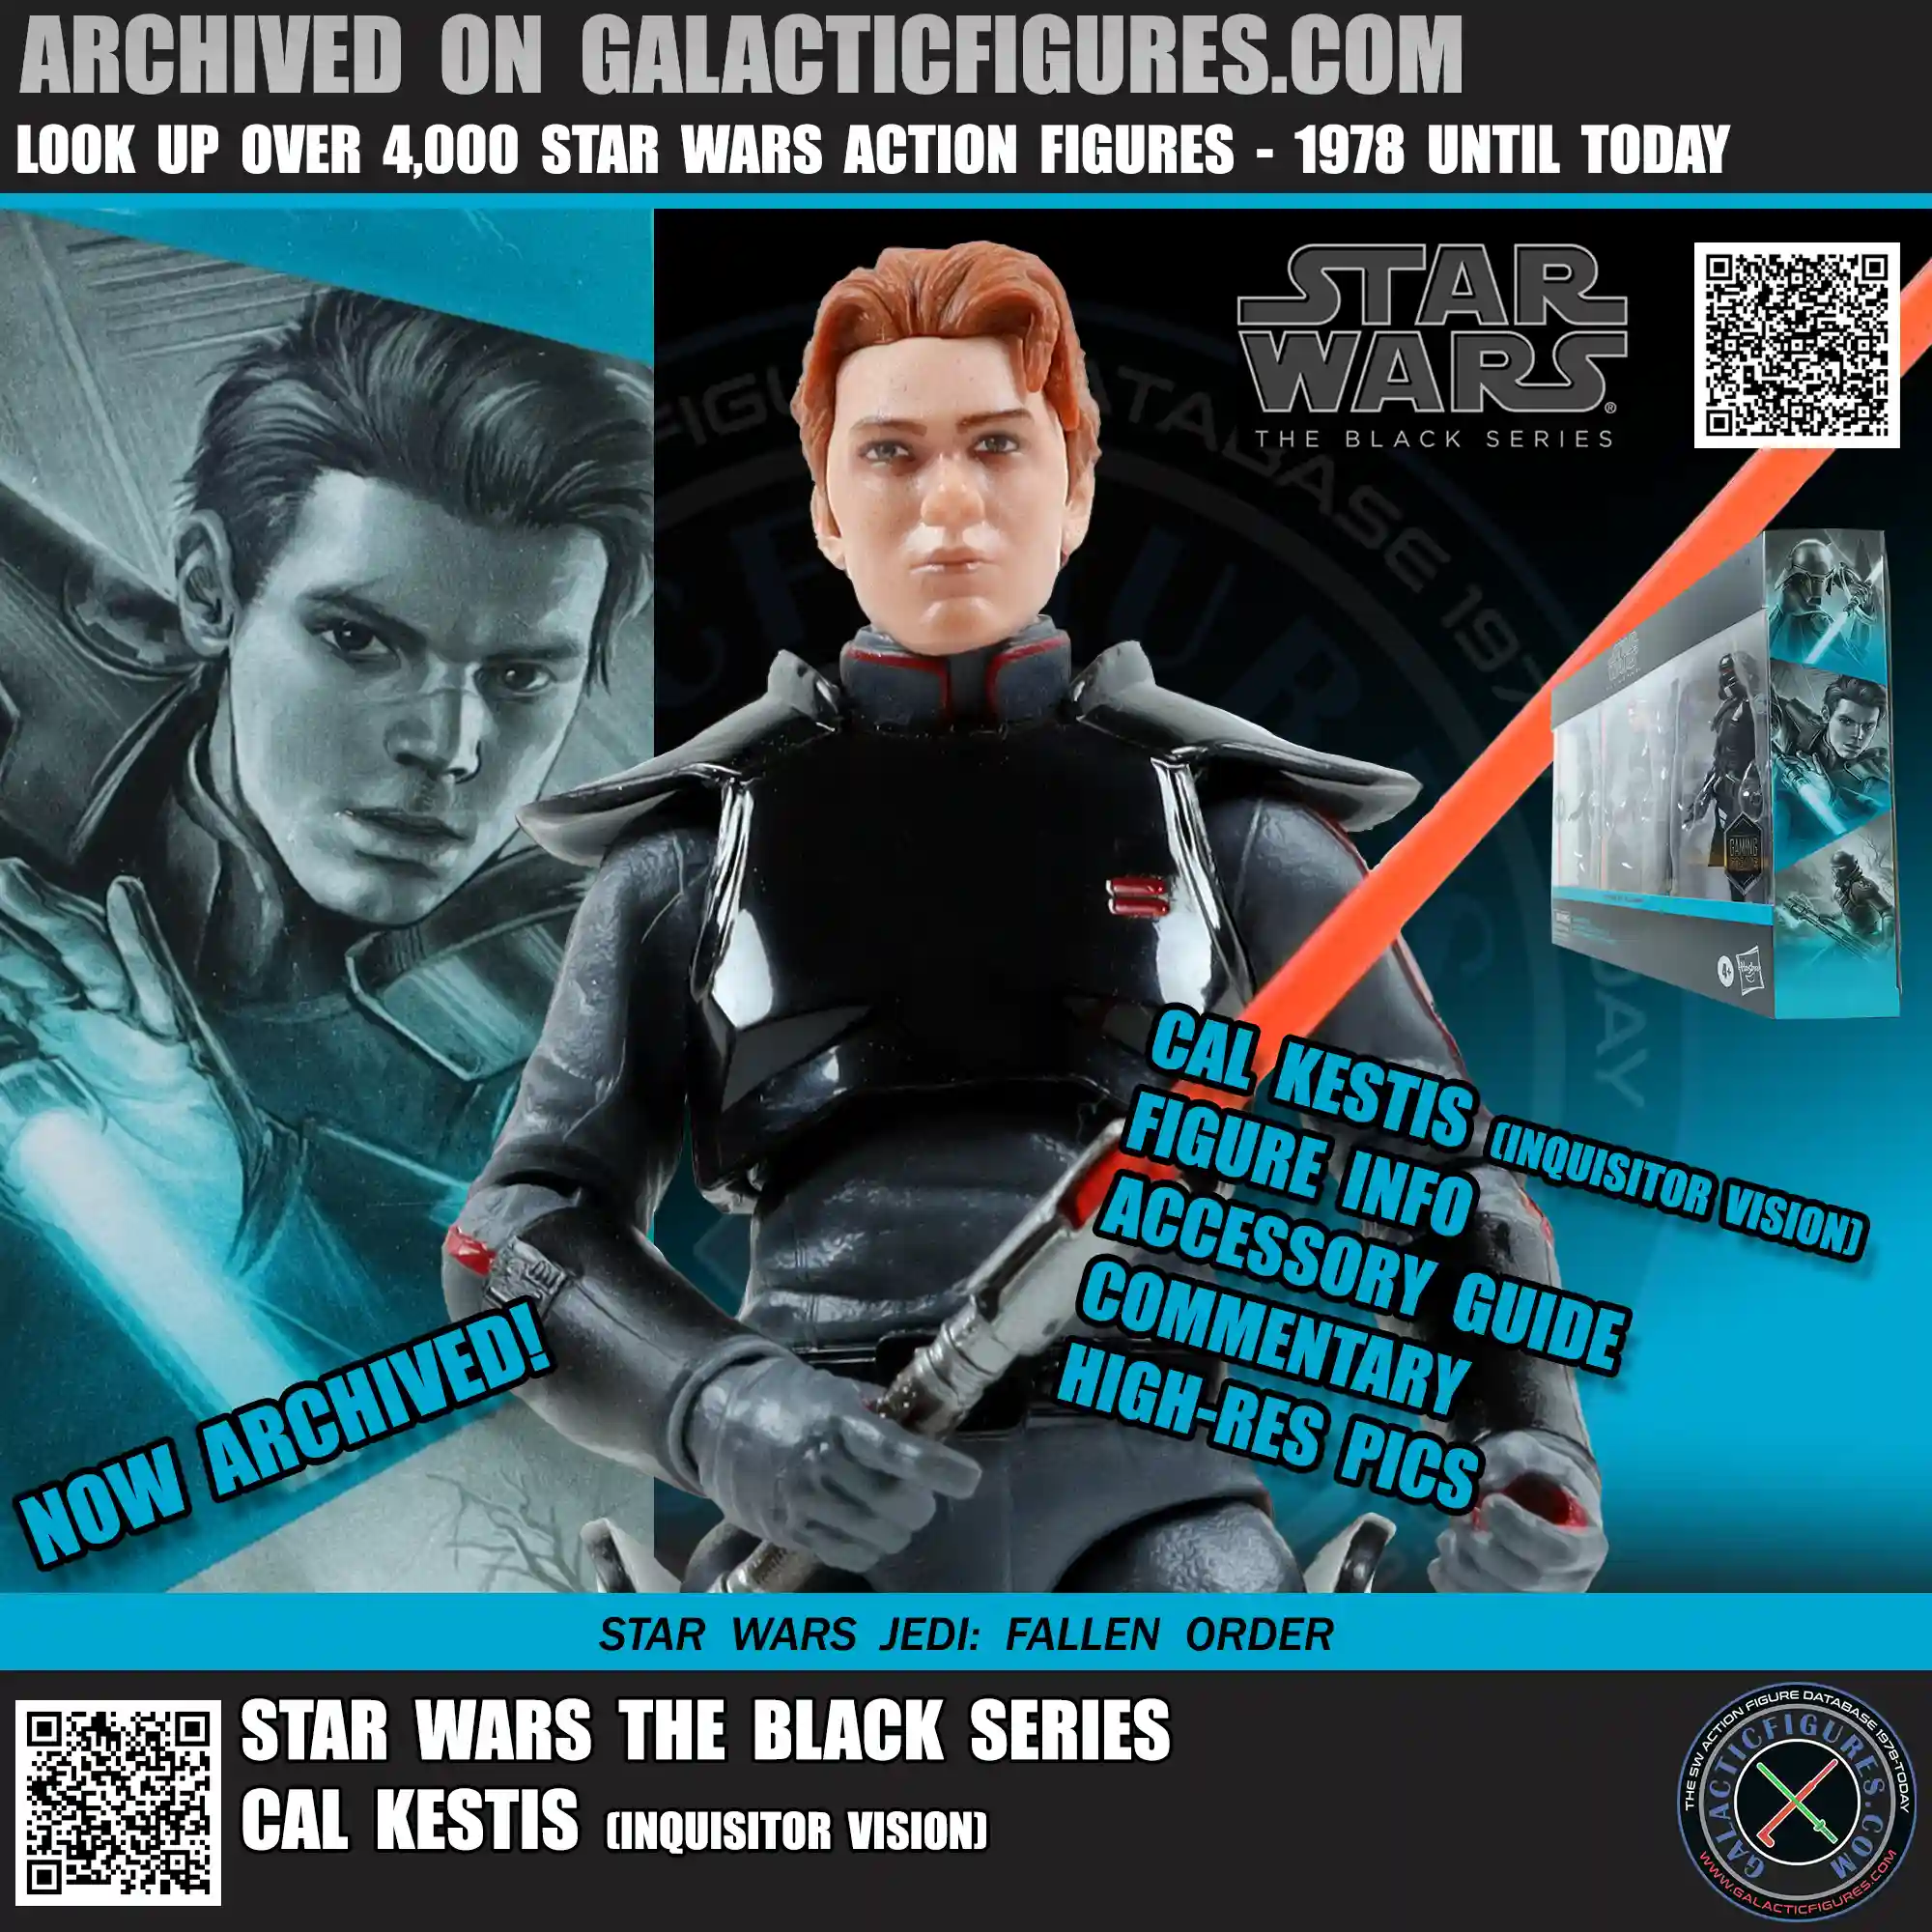 Black Series Cal Kestis (Inquisitor Vision) Archived!